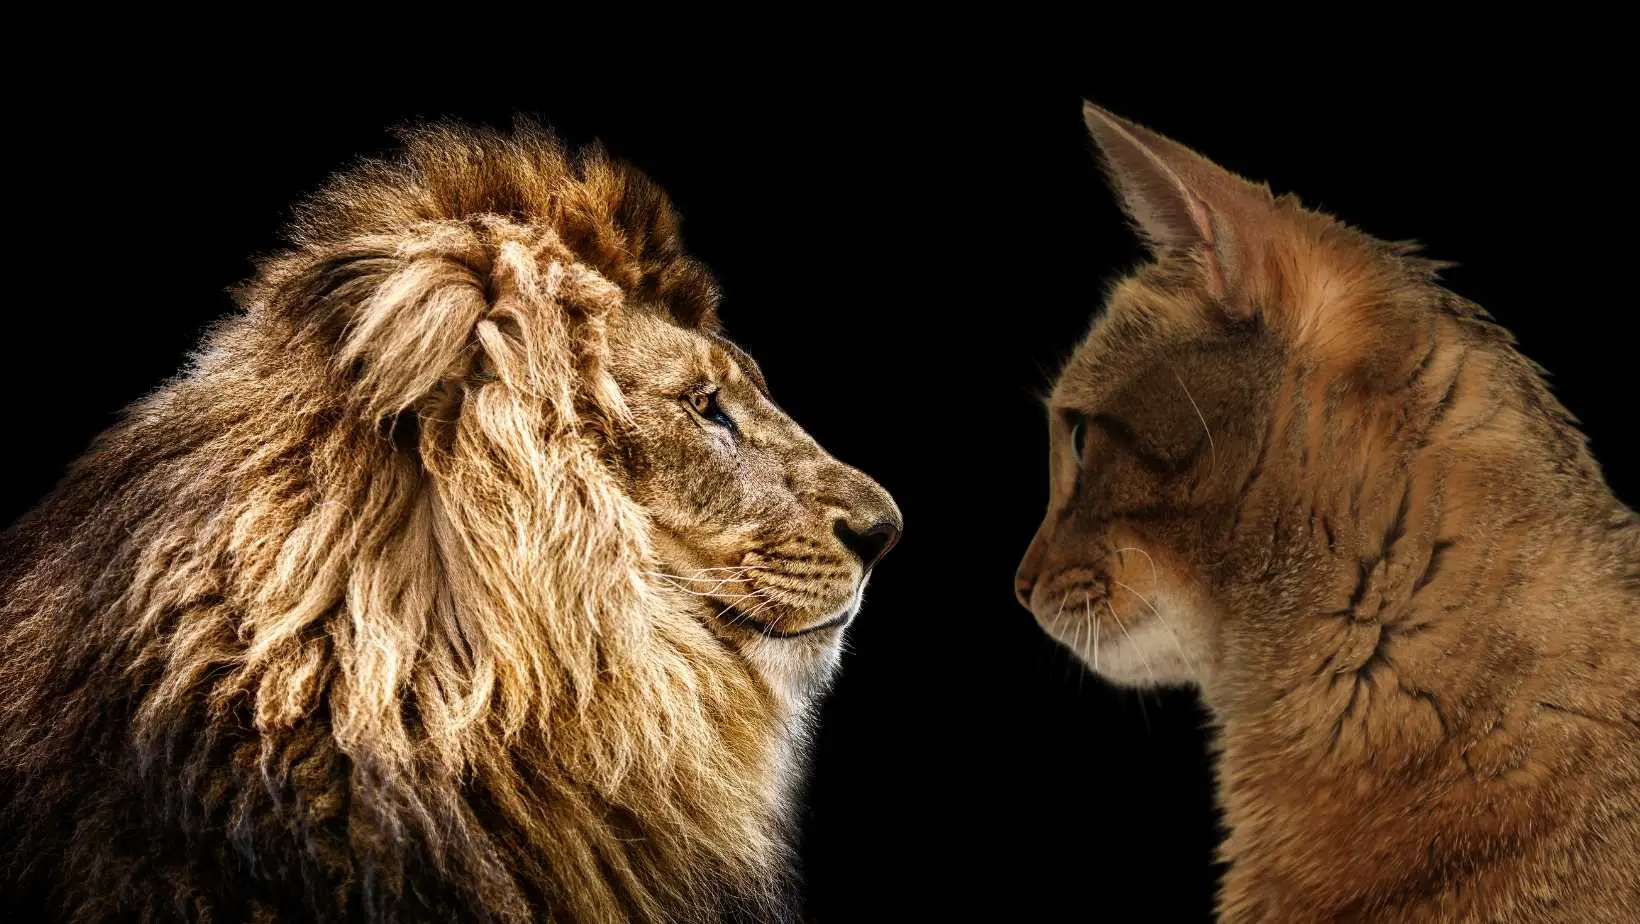 What Does Your Cat Have in Common With Lions?